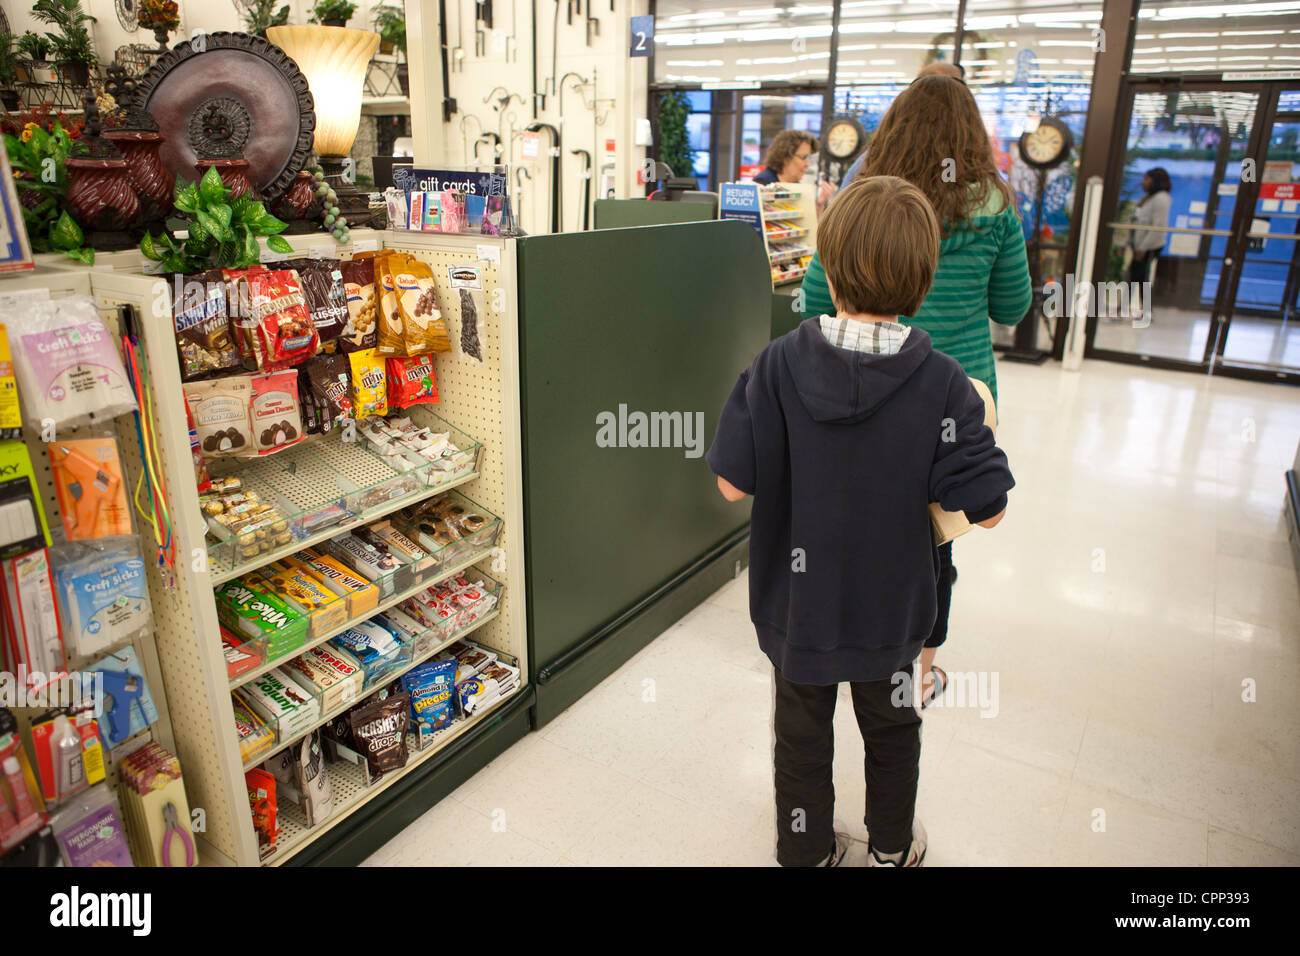 Nine year old getting ready to pay for an item in a store and looking at candy for sale in check out line. Stock Photo